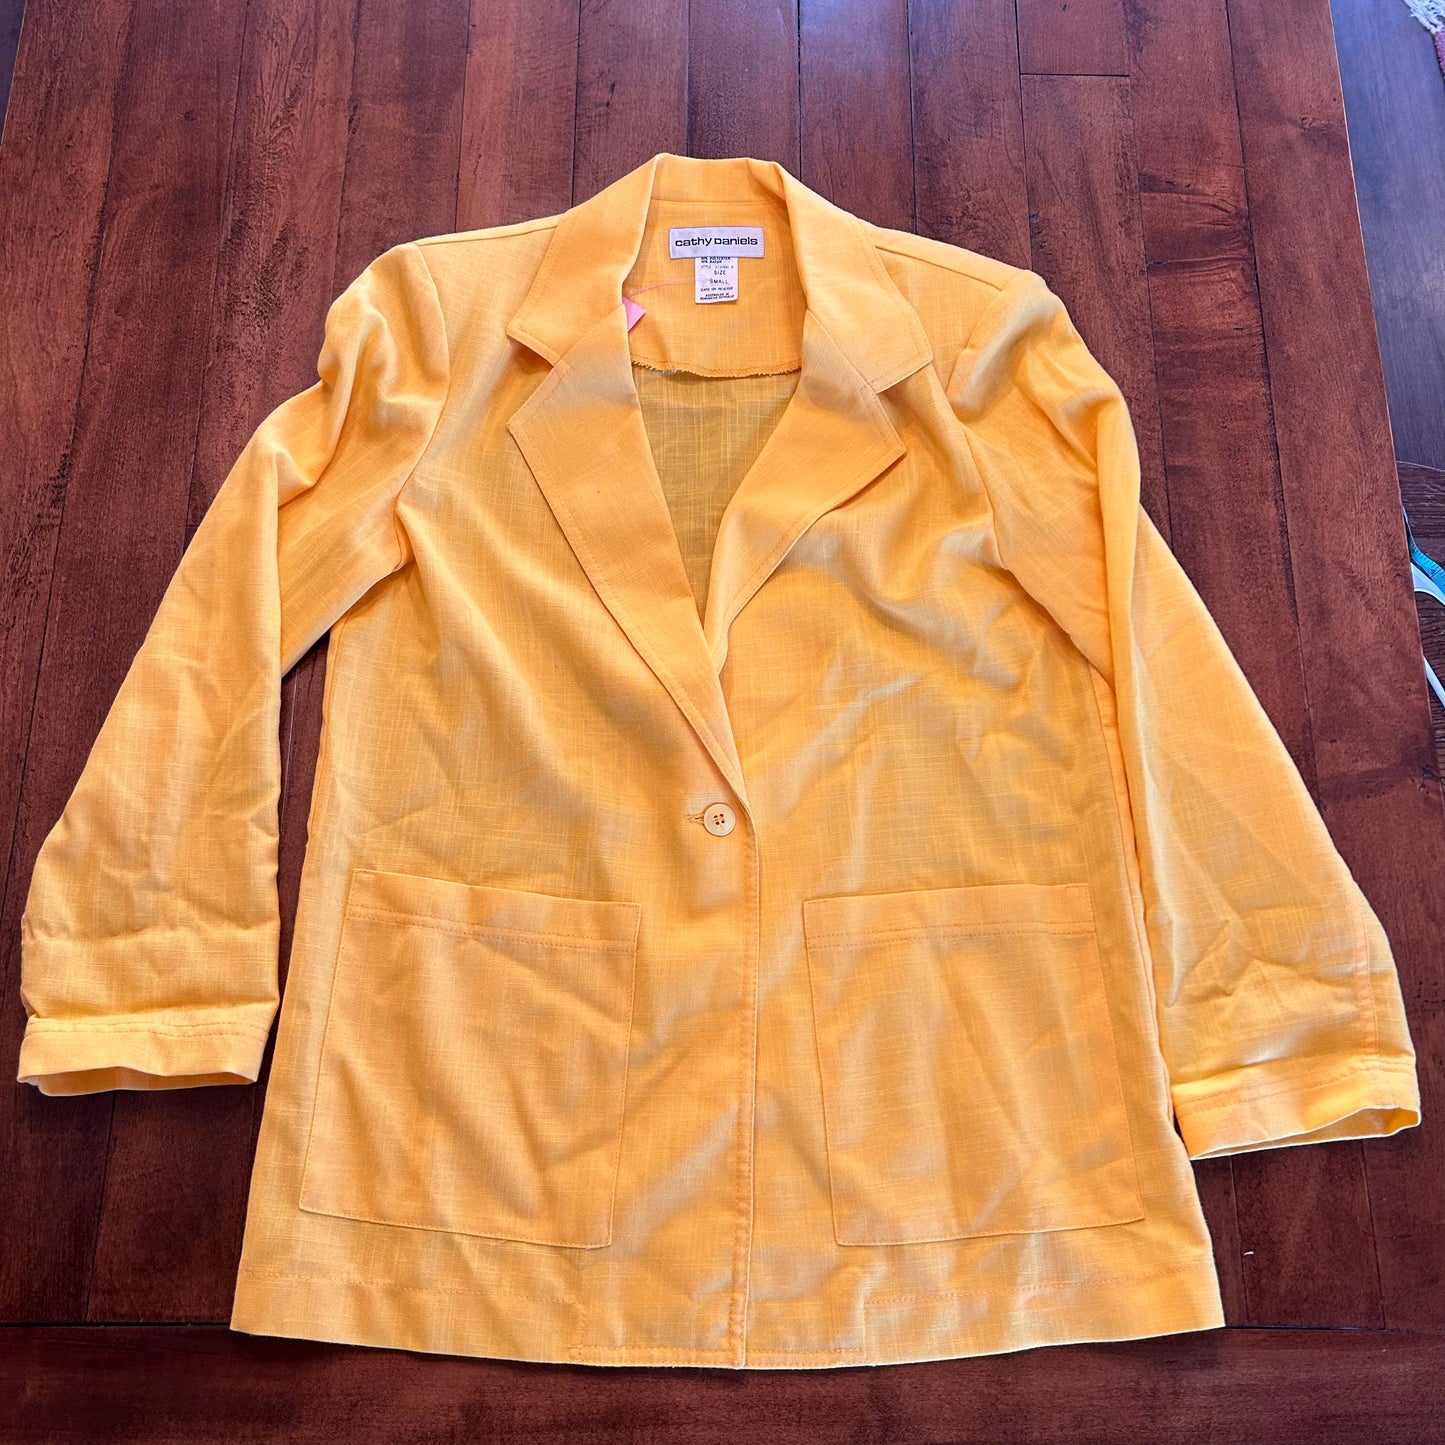 Vintage Gold Cathy Daniels Blazer with Shoulder Pads Size S